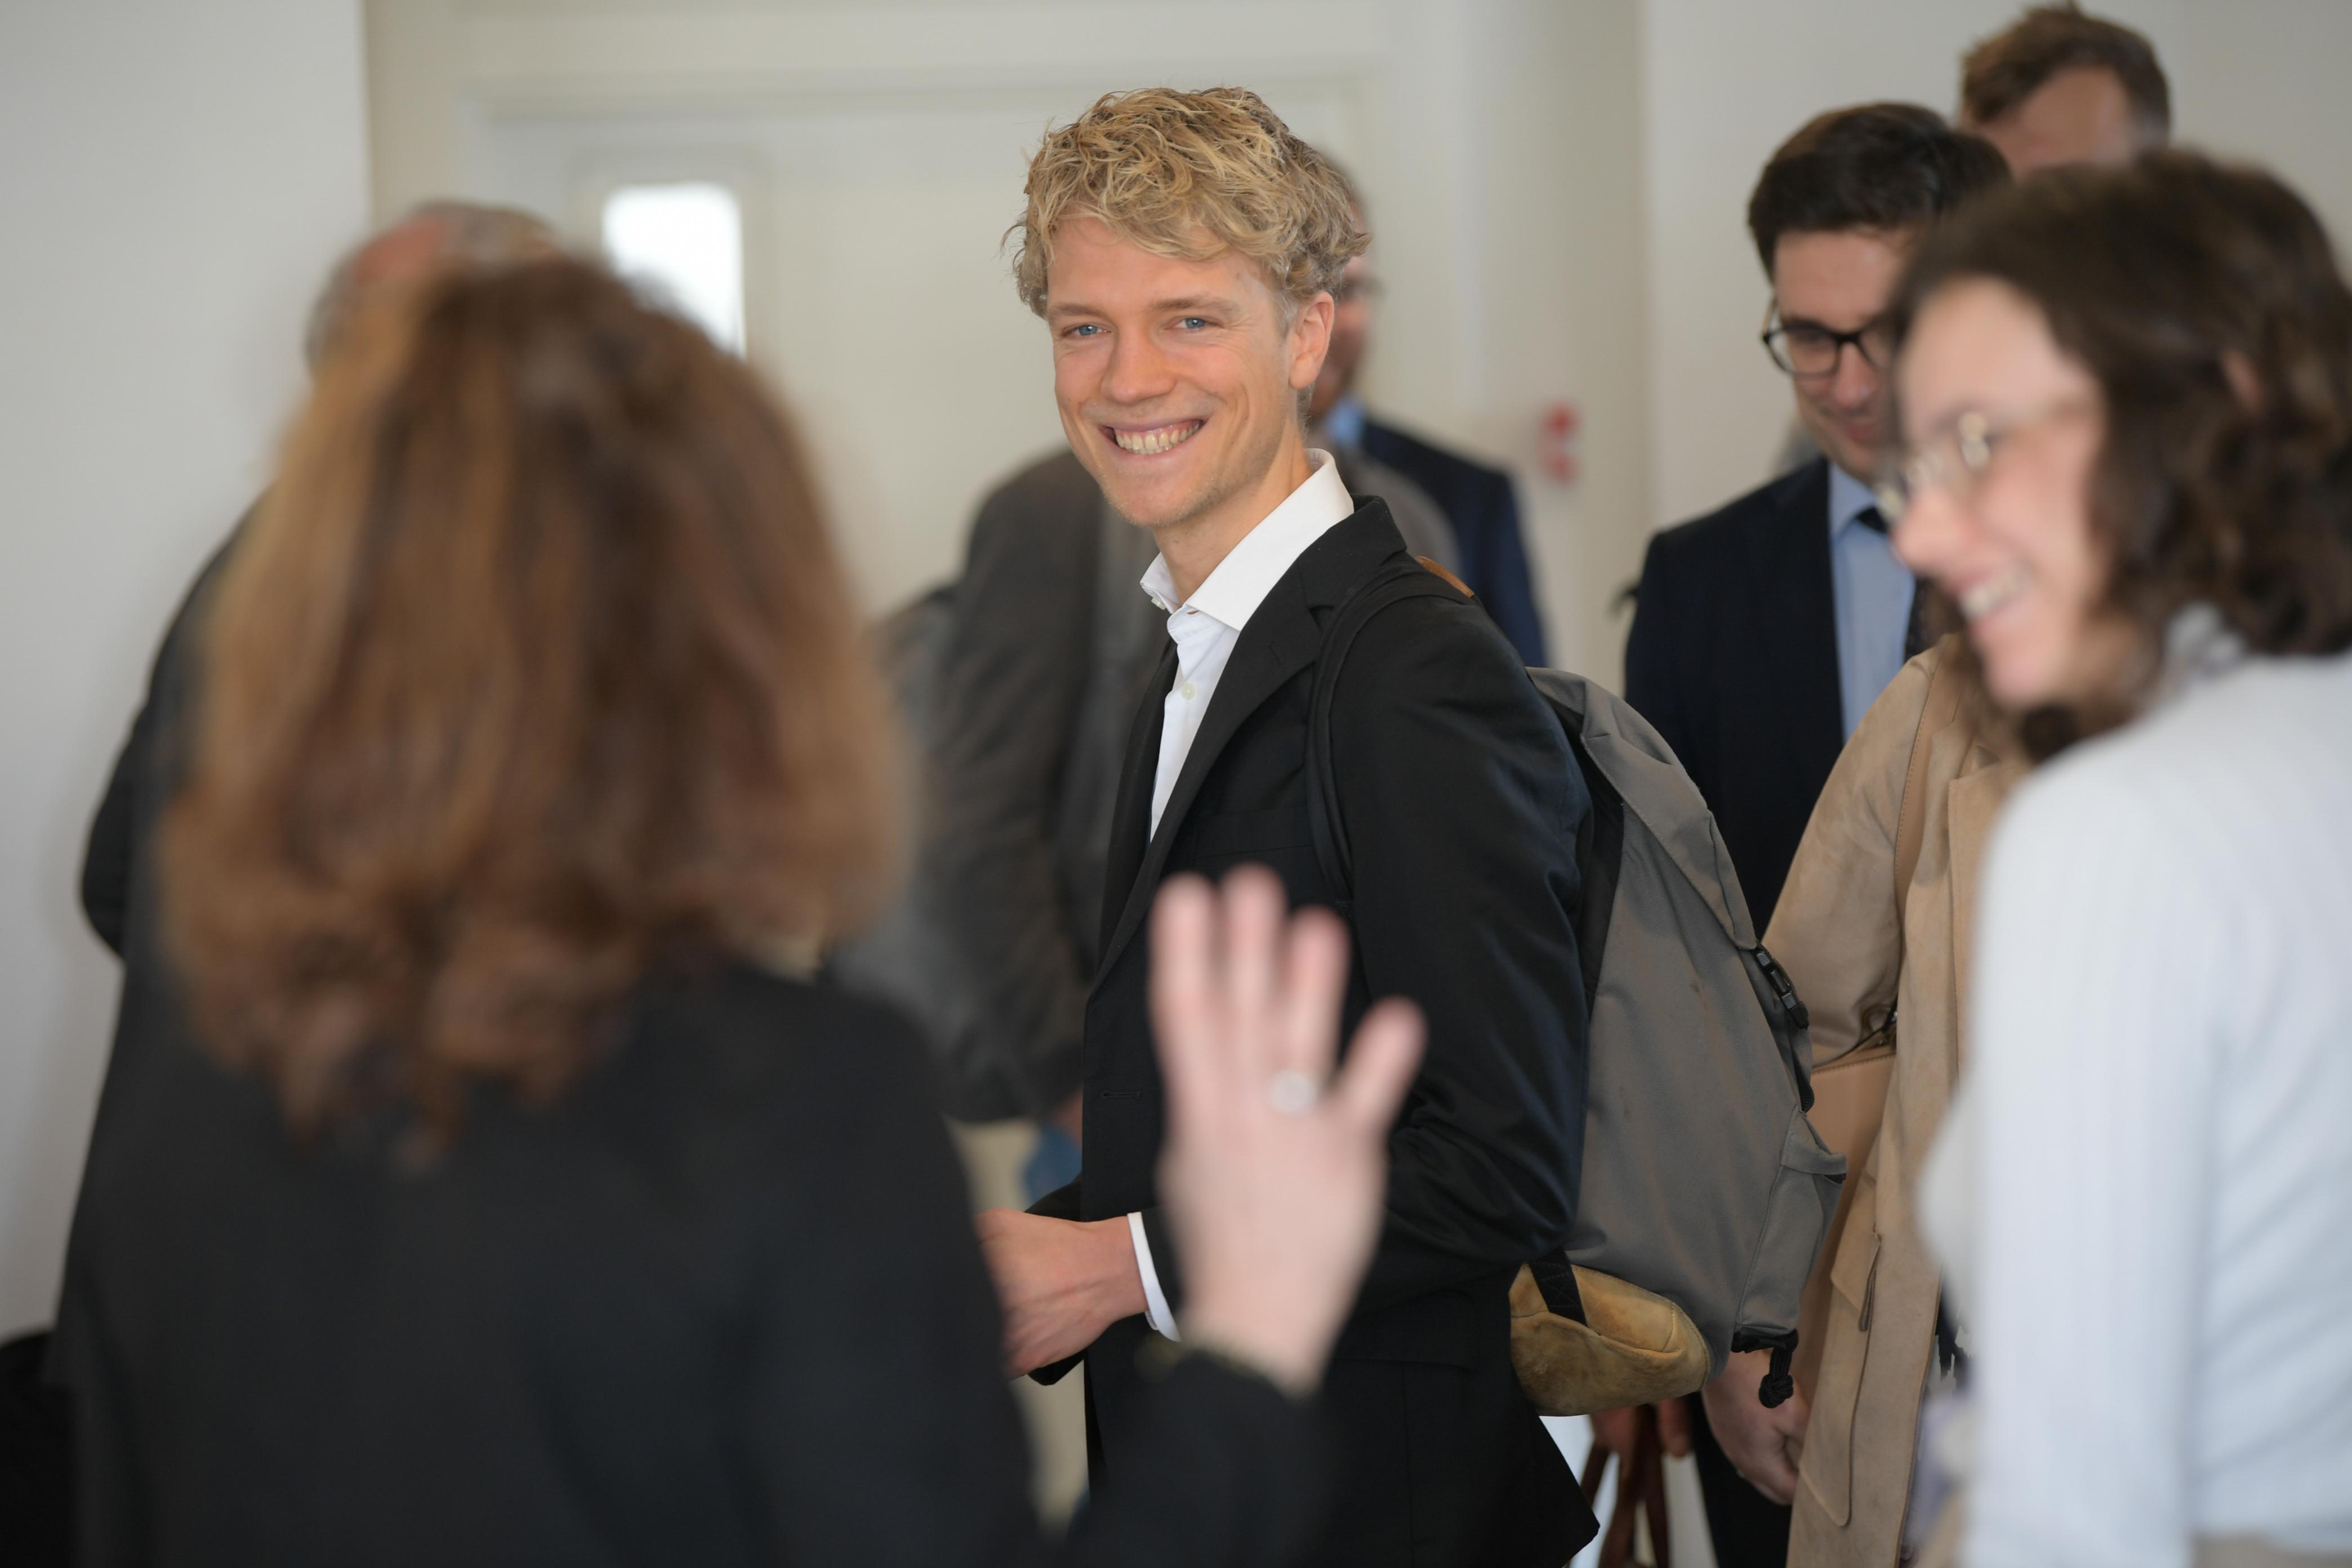 Alexander Wentker smiles as he walks through a crowd of people at a conference